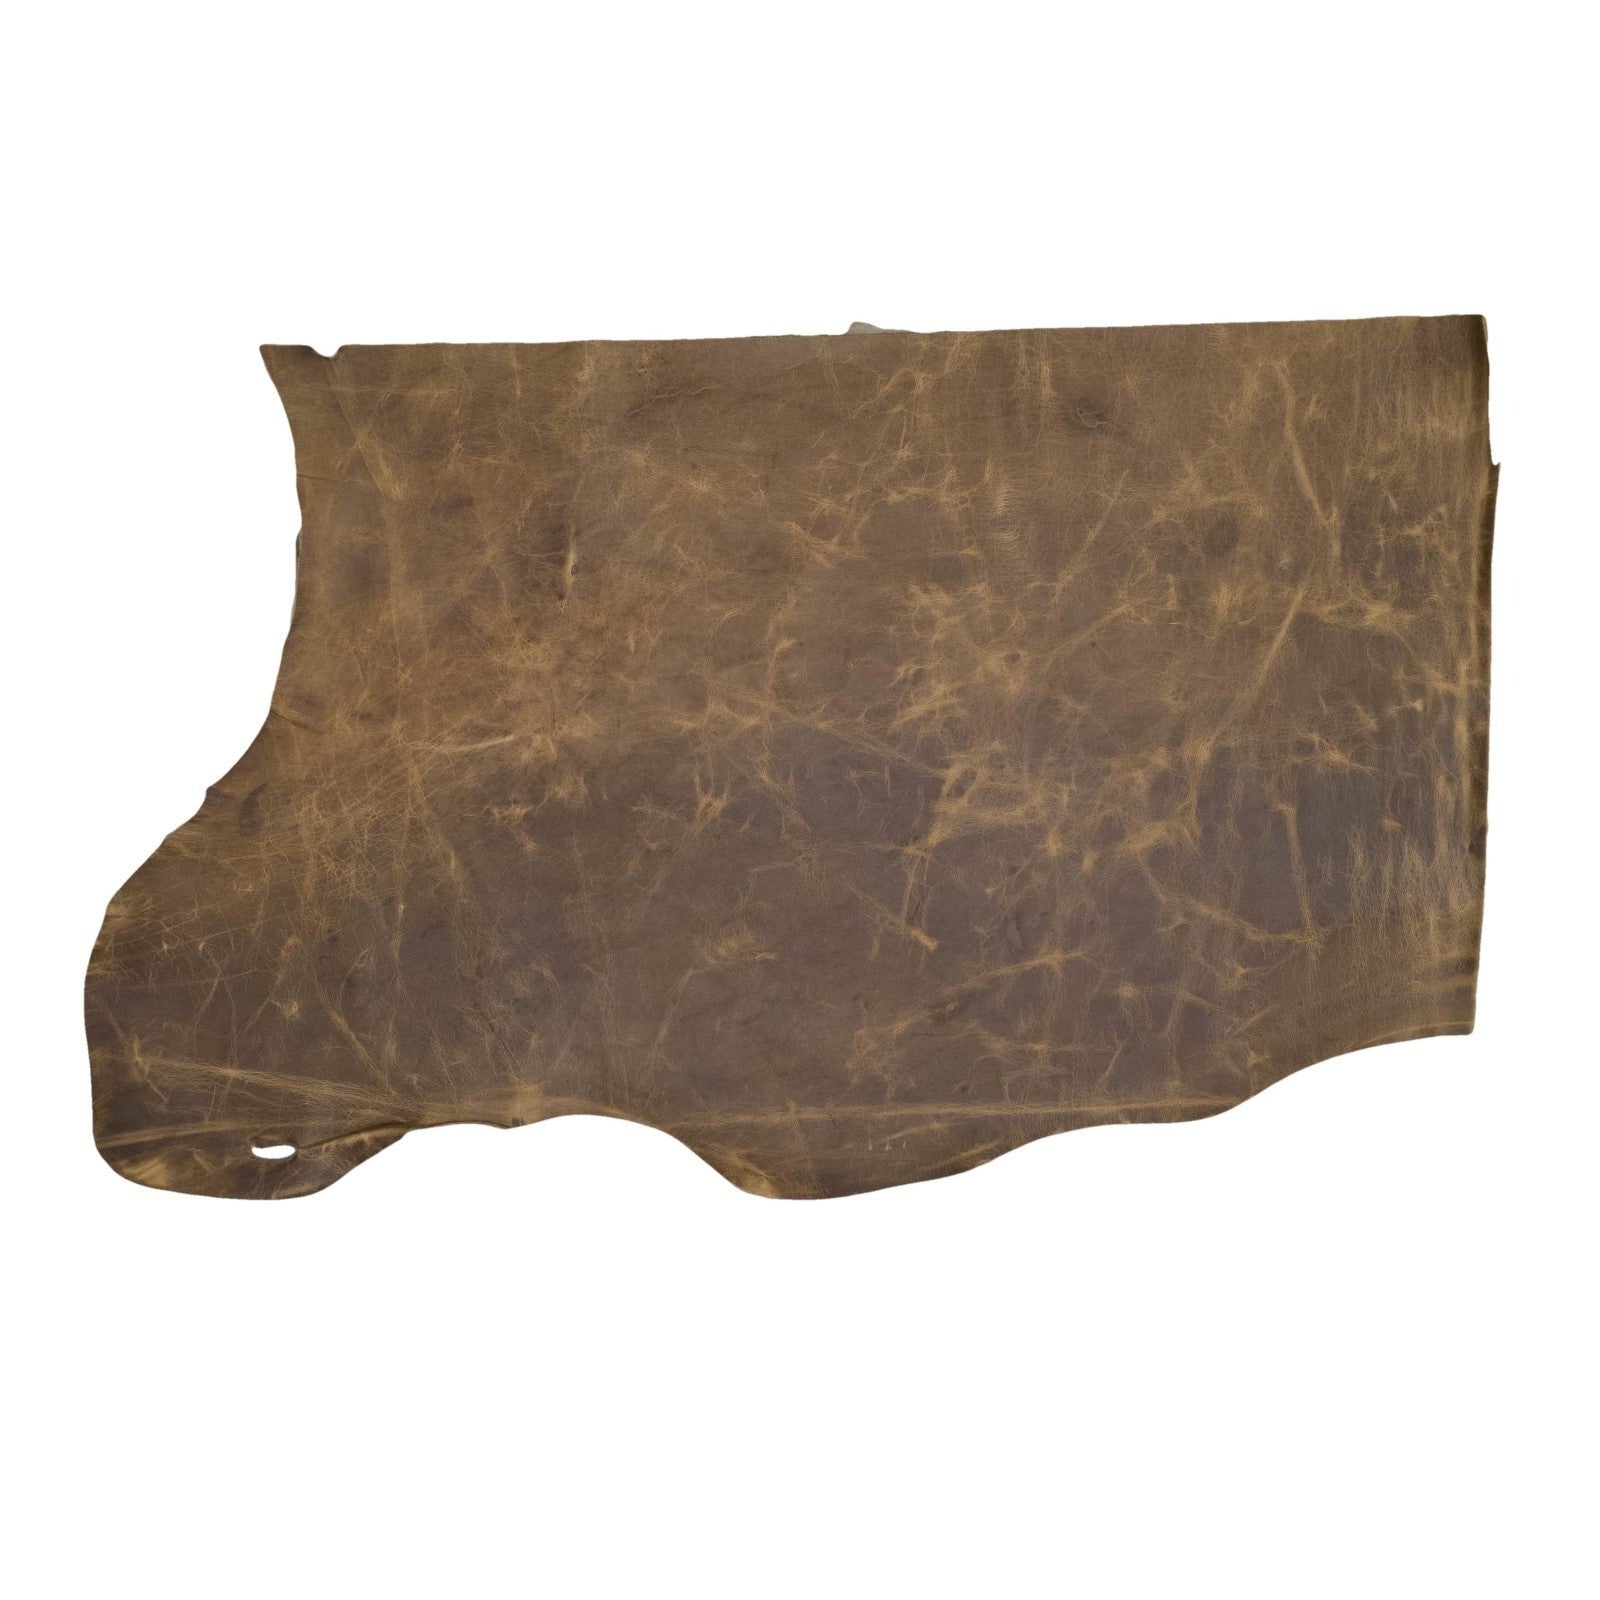 River Bank Brown, 6.5-32 SqFt, 2-3 oz, Pull up Sides & Pieces, Crazy Buffalo, 6.5-7.5 / Project Piece (Bottom) | The Leather Guy